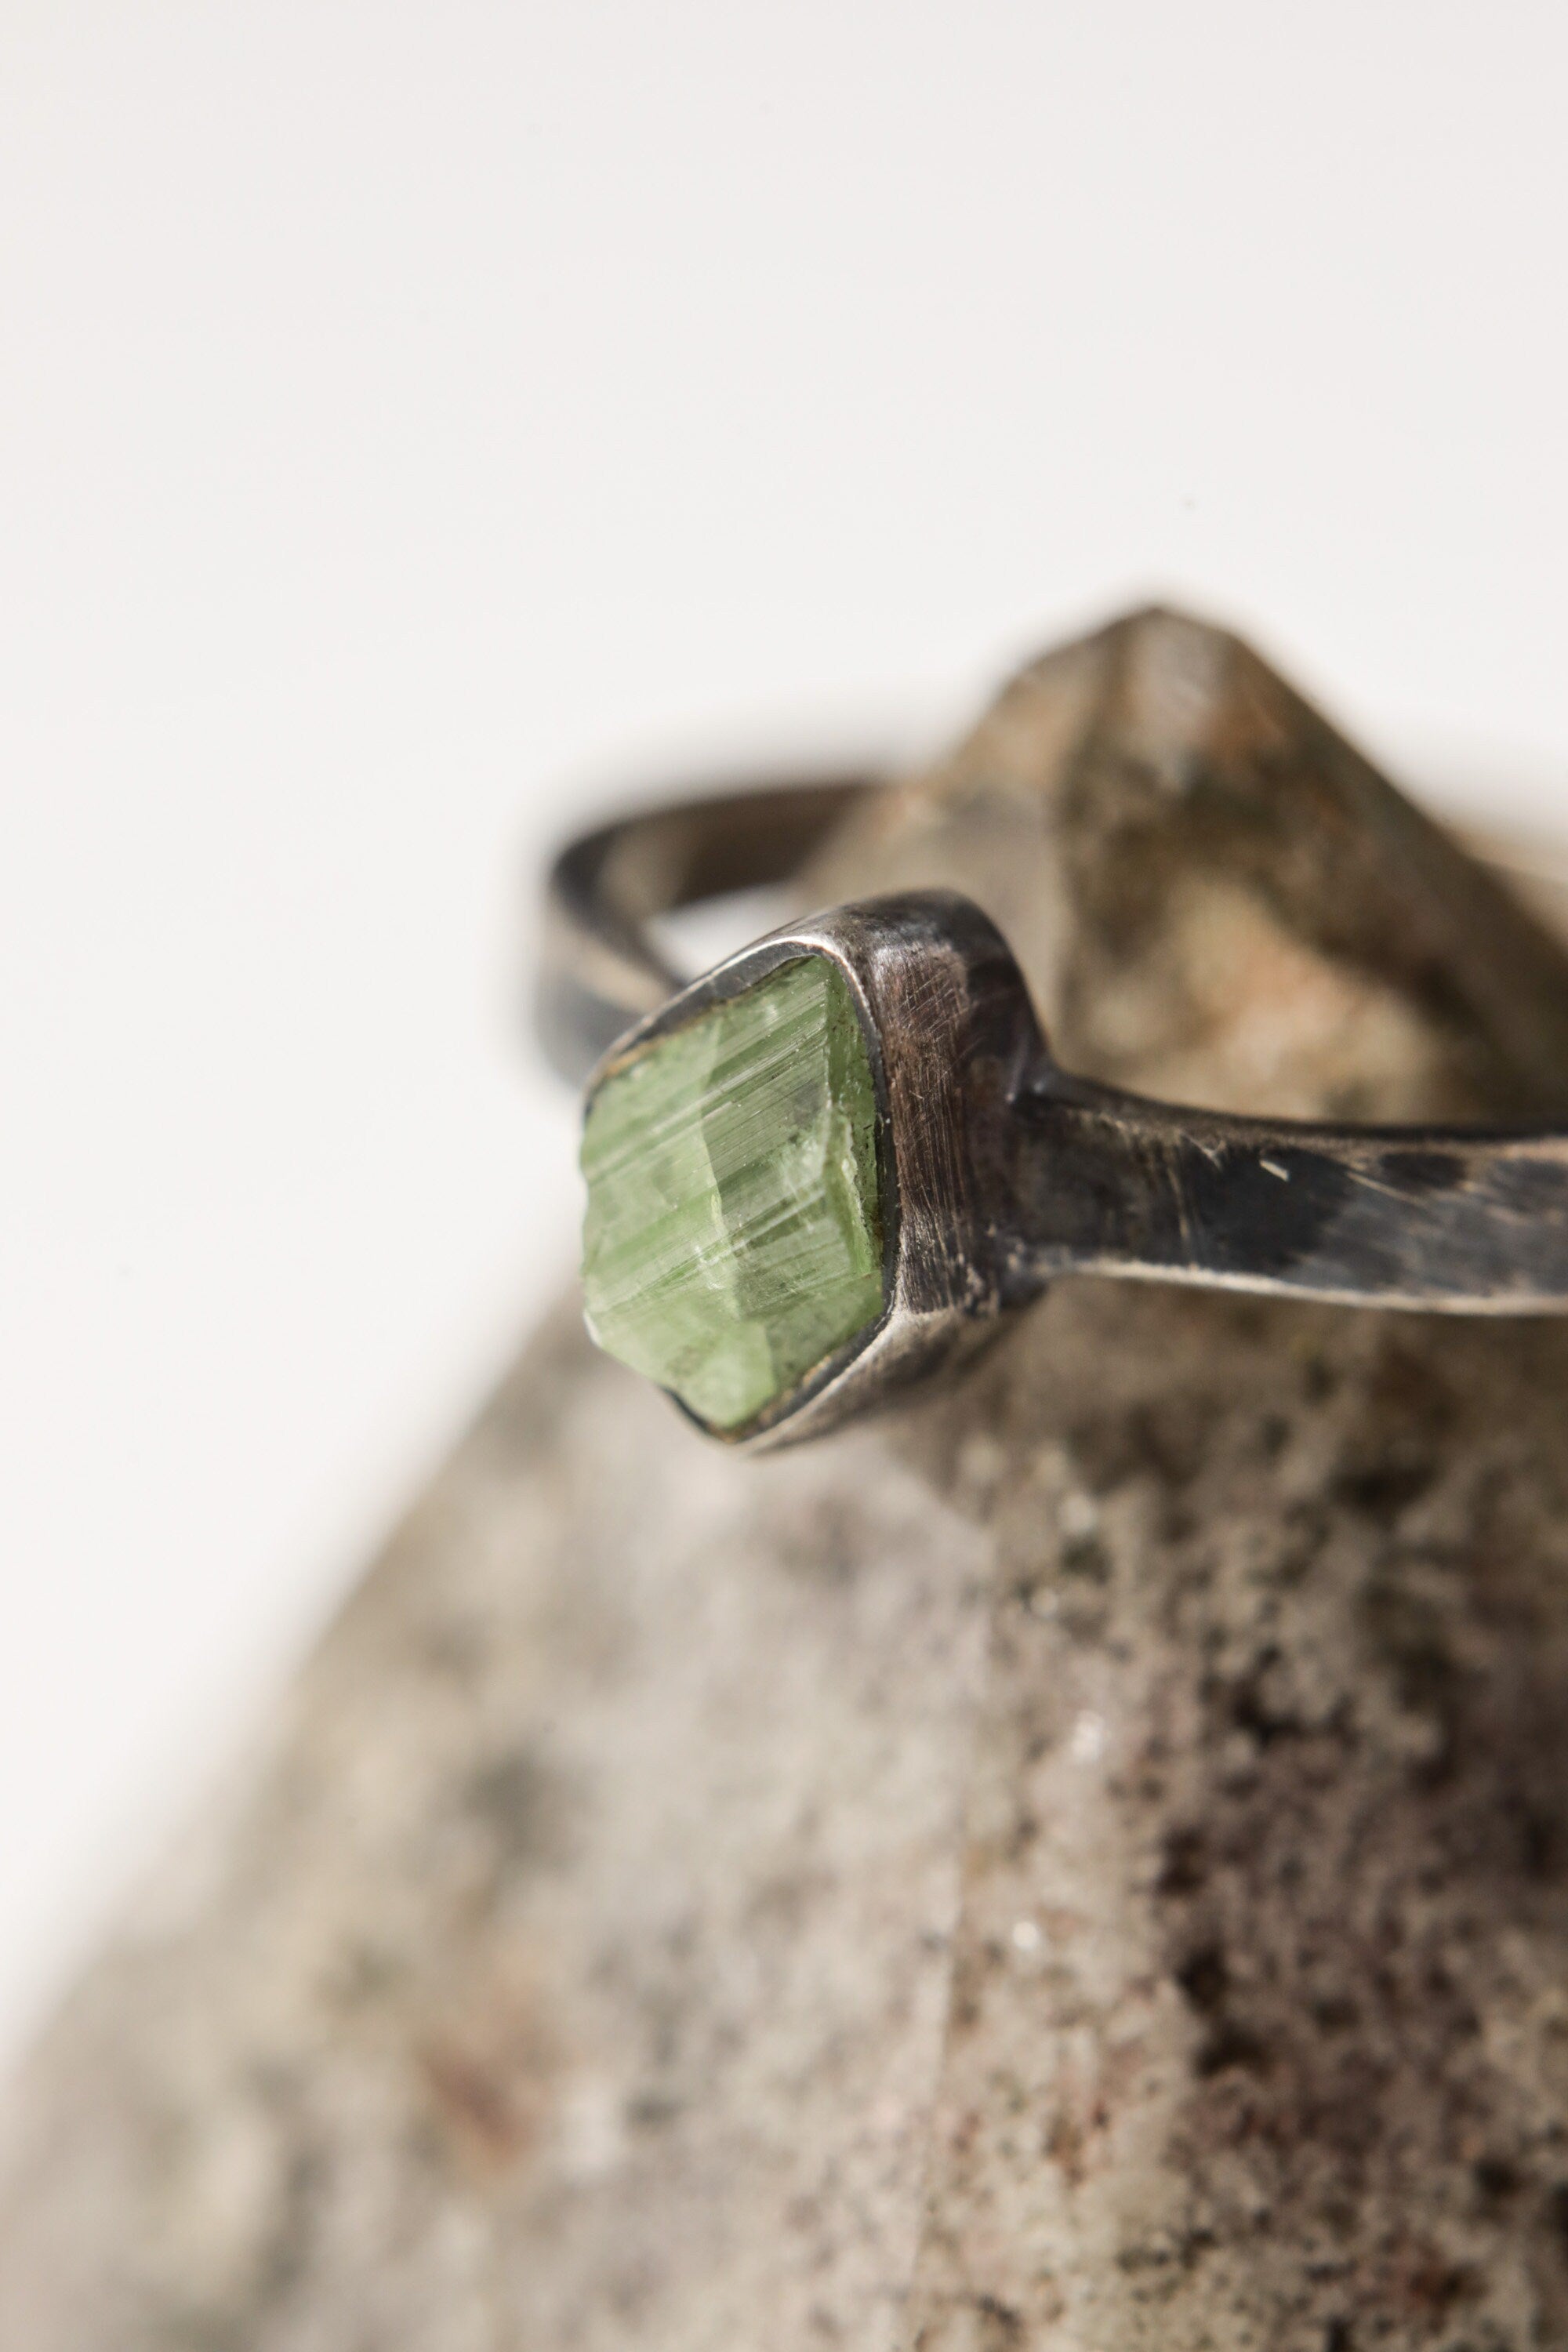 Verde Radiance - Sterling Silver Ring with Black Tourmaline - Size 3 US - NO/01